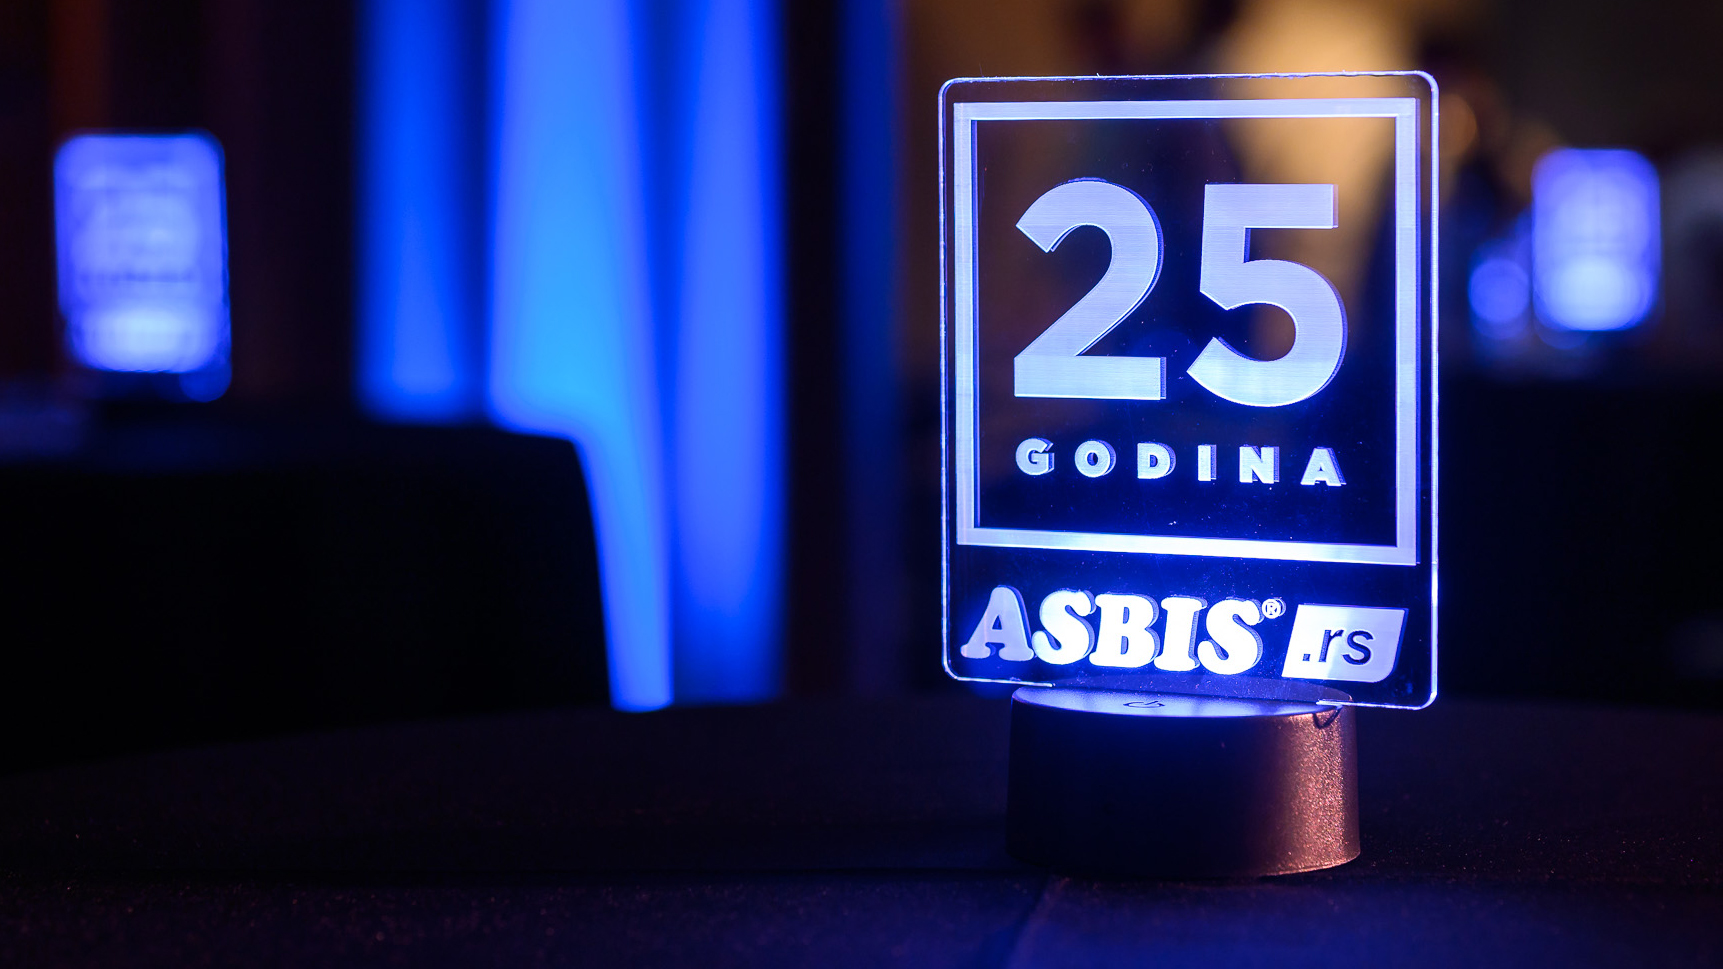 ASBIS celebrated 25 years of business in the Republic of Serbia